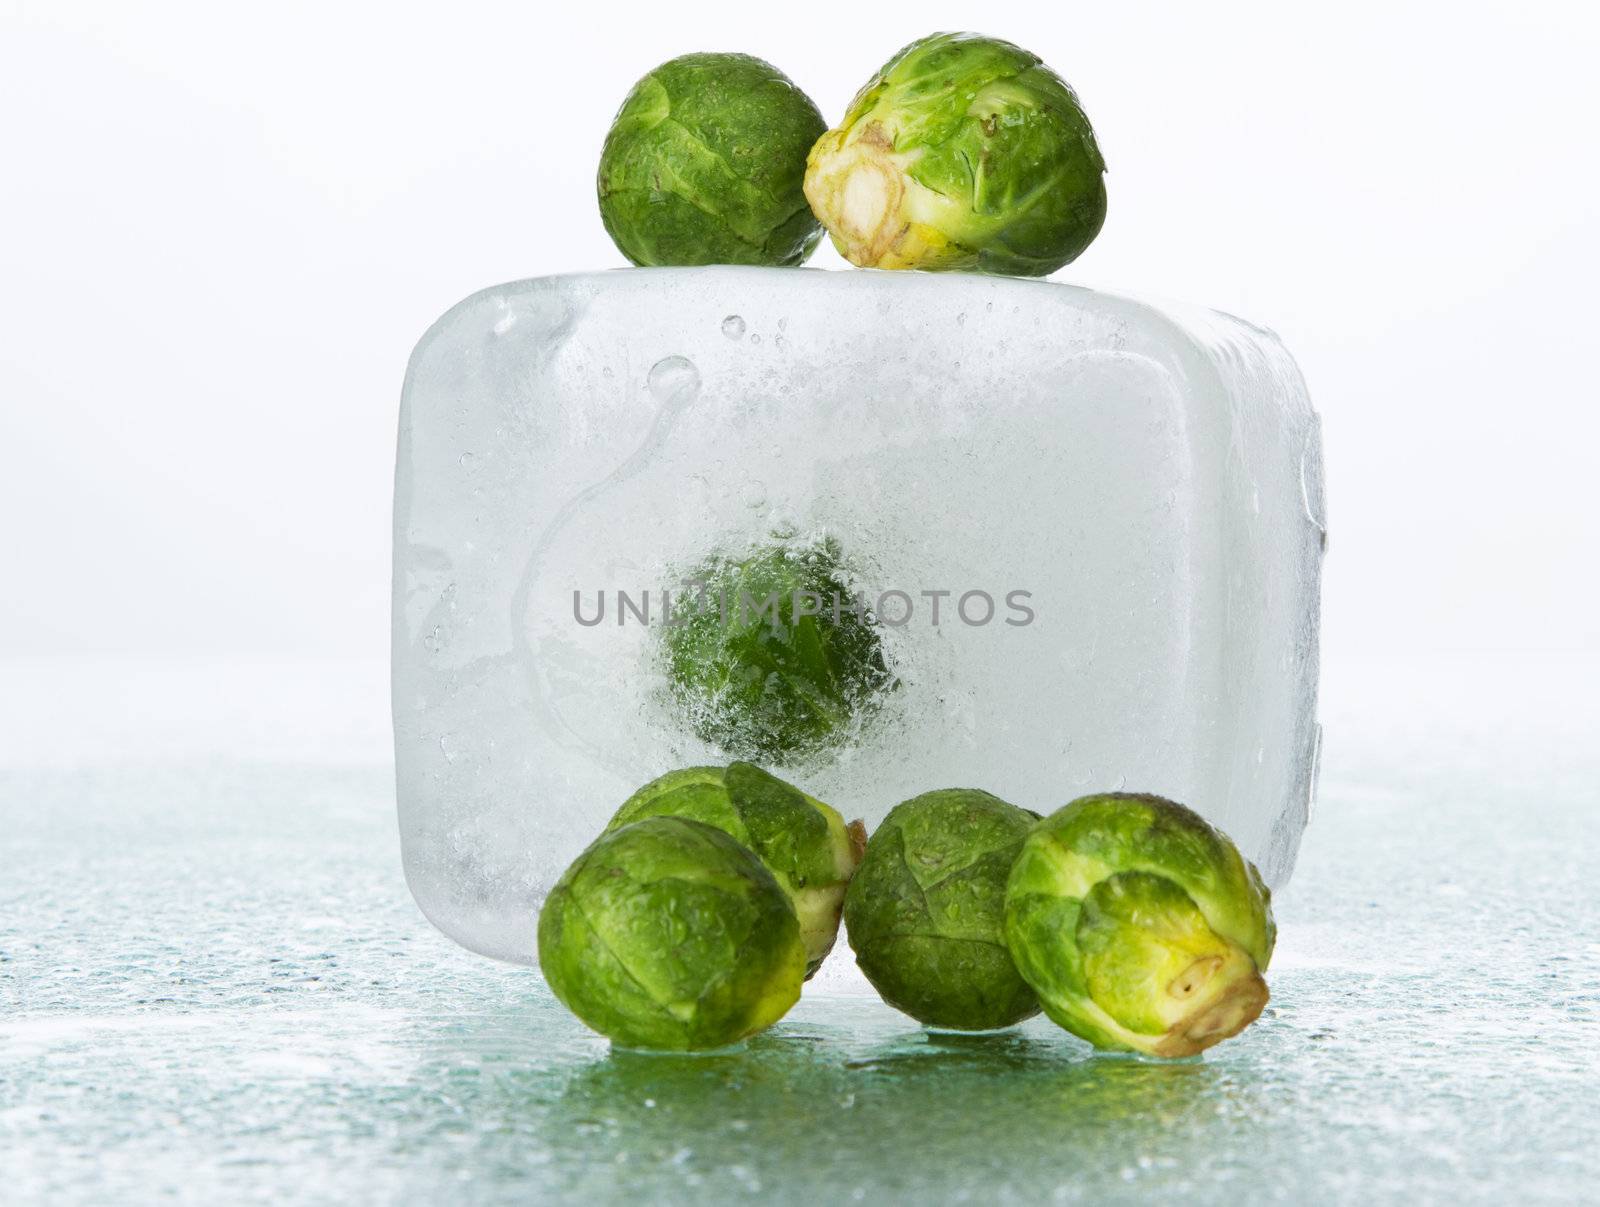 Brussels sprout on wet surface by Gdolgikh